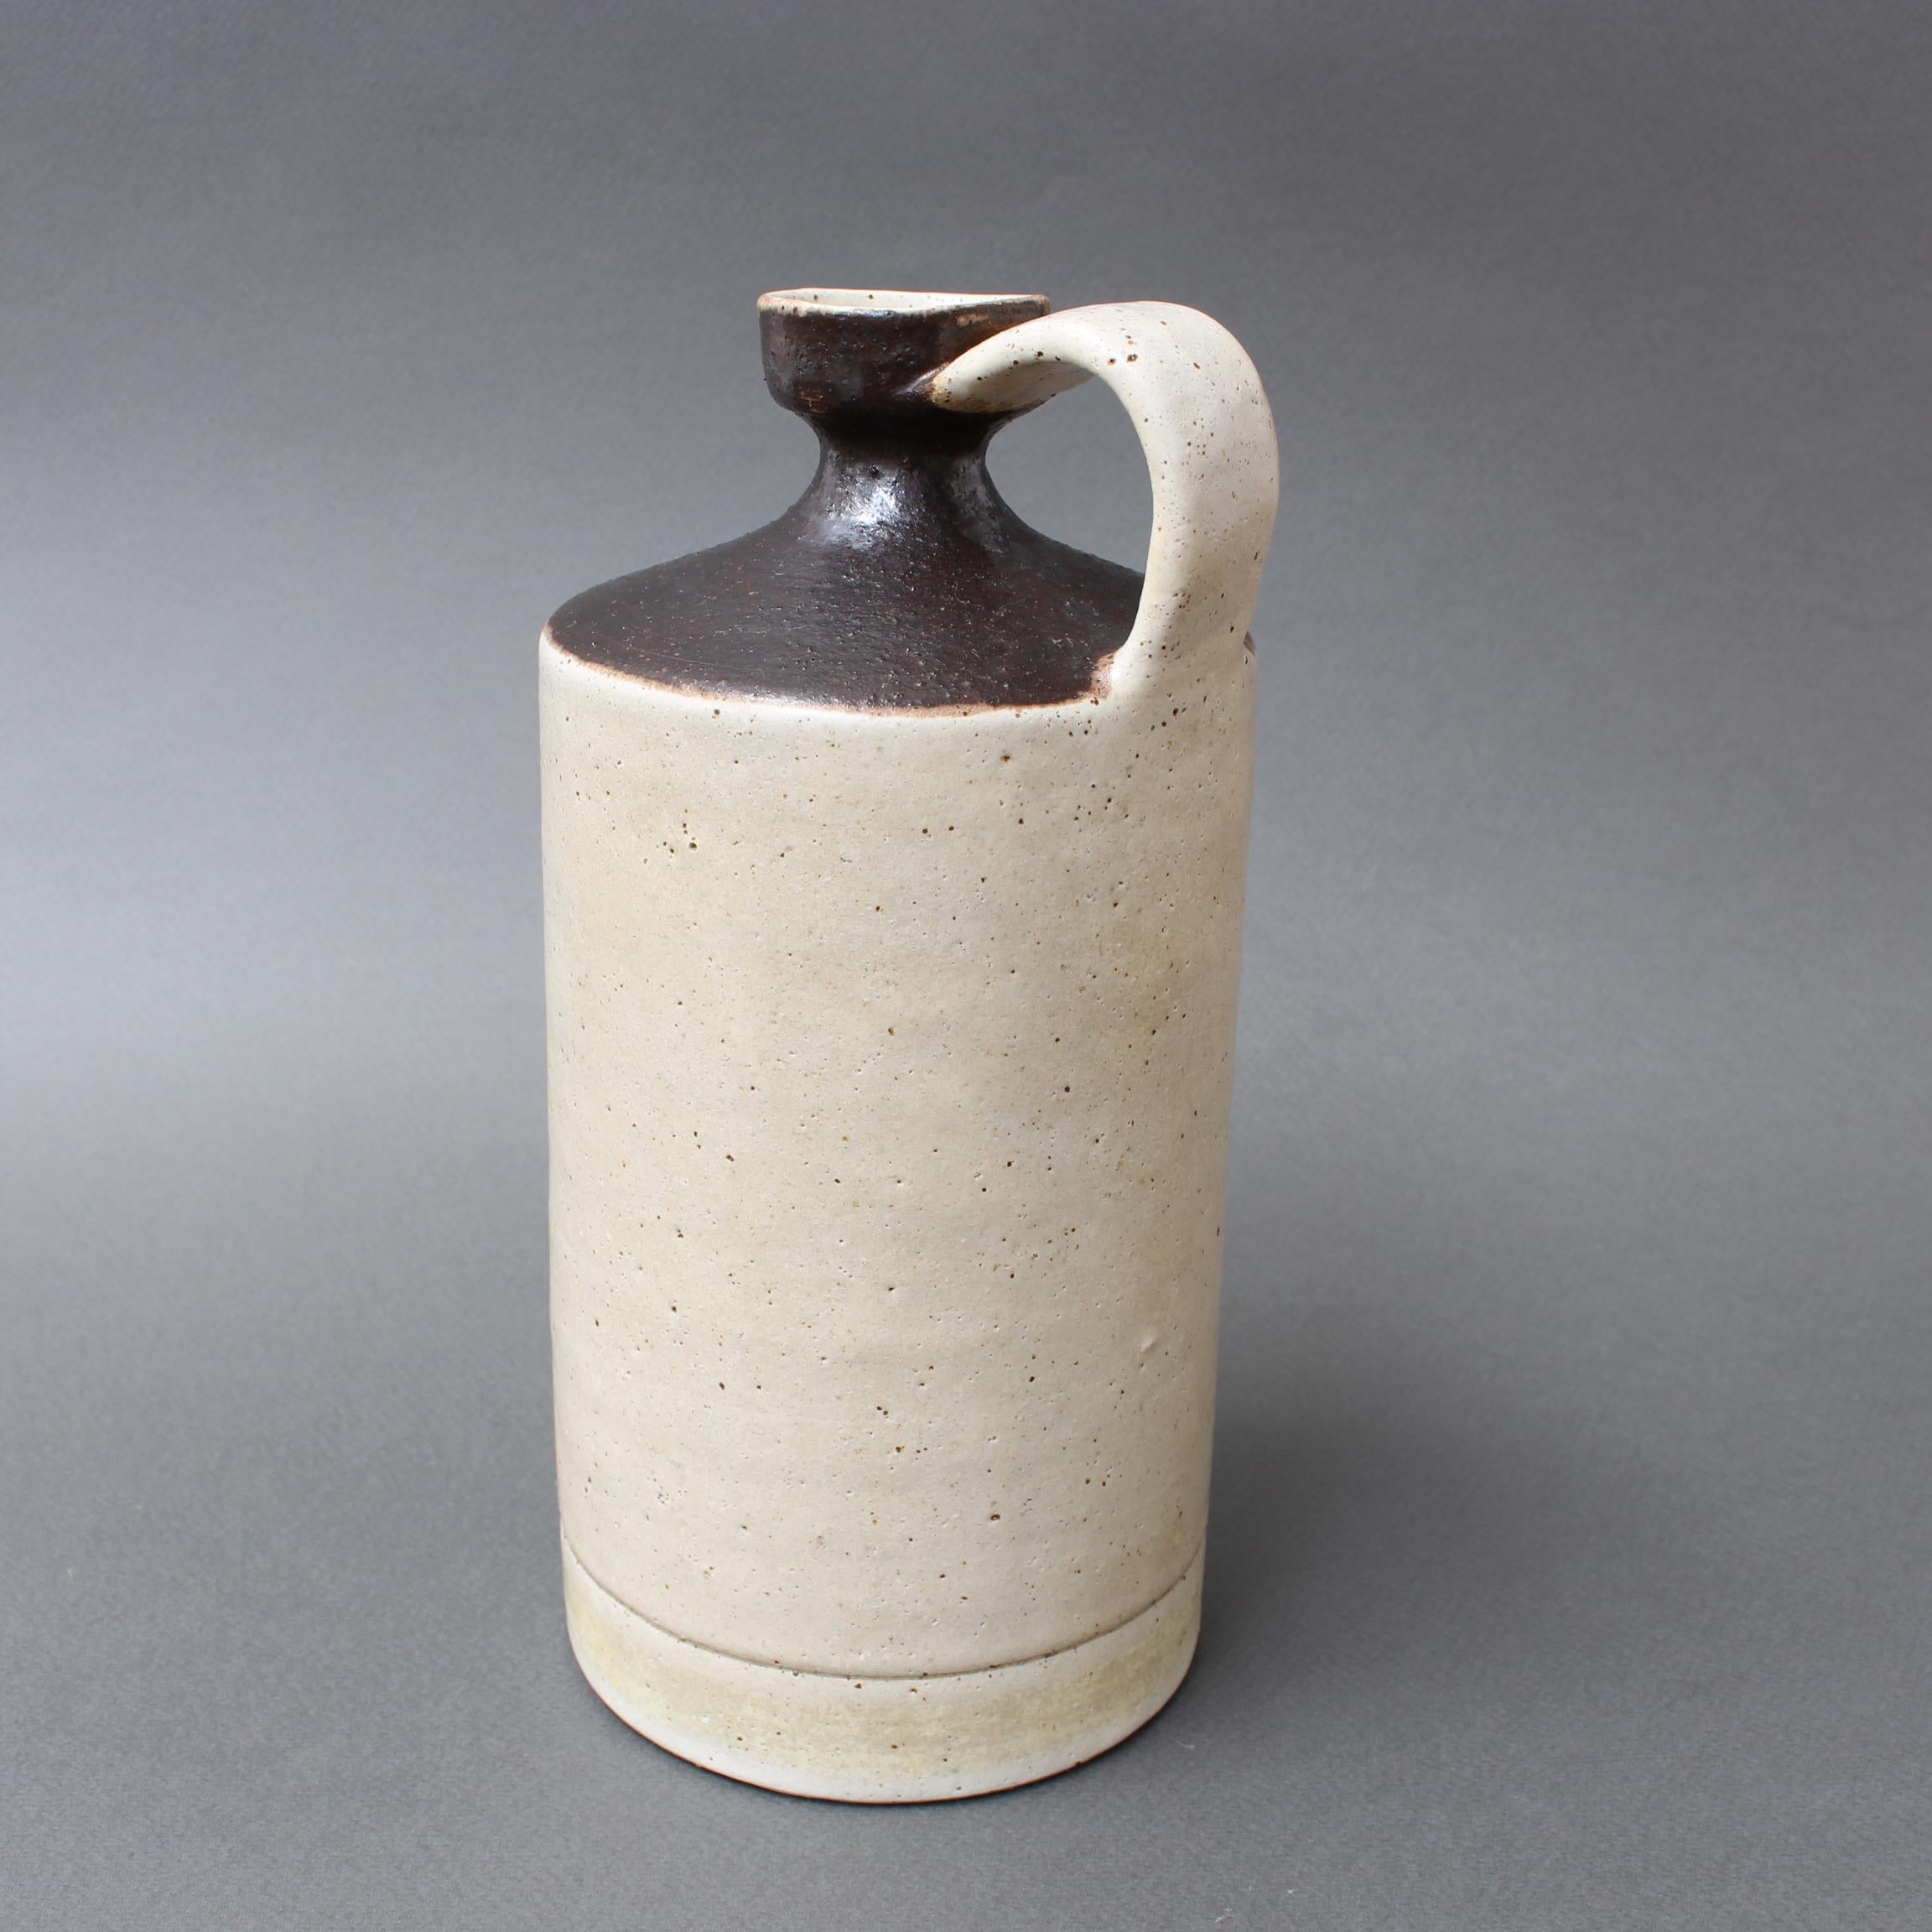 Italian ceramic decorative pitcher / vase by Bruno Gambone (circa 1970s). Just as our other Bruno Gambone vessels do, this one too has a purity of form, muted hue and demonstrated, effortless beauty that is only created by Bruno Gambone. He